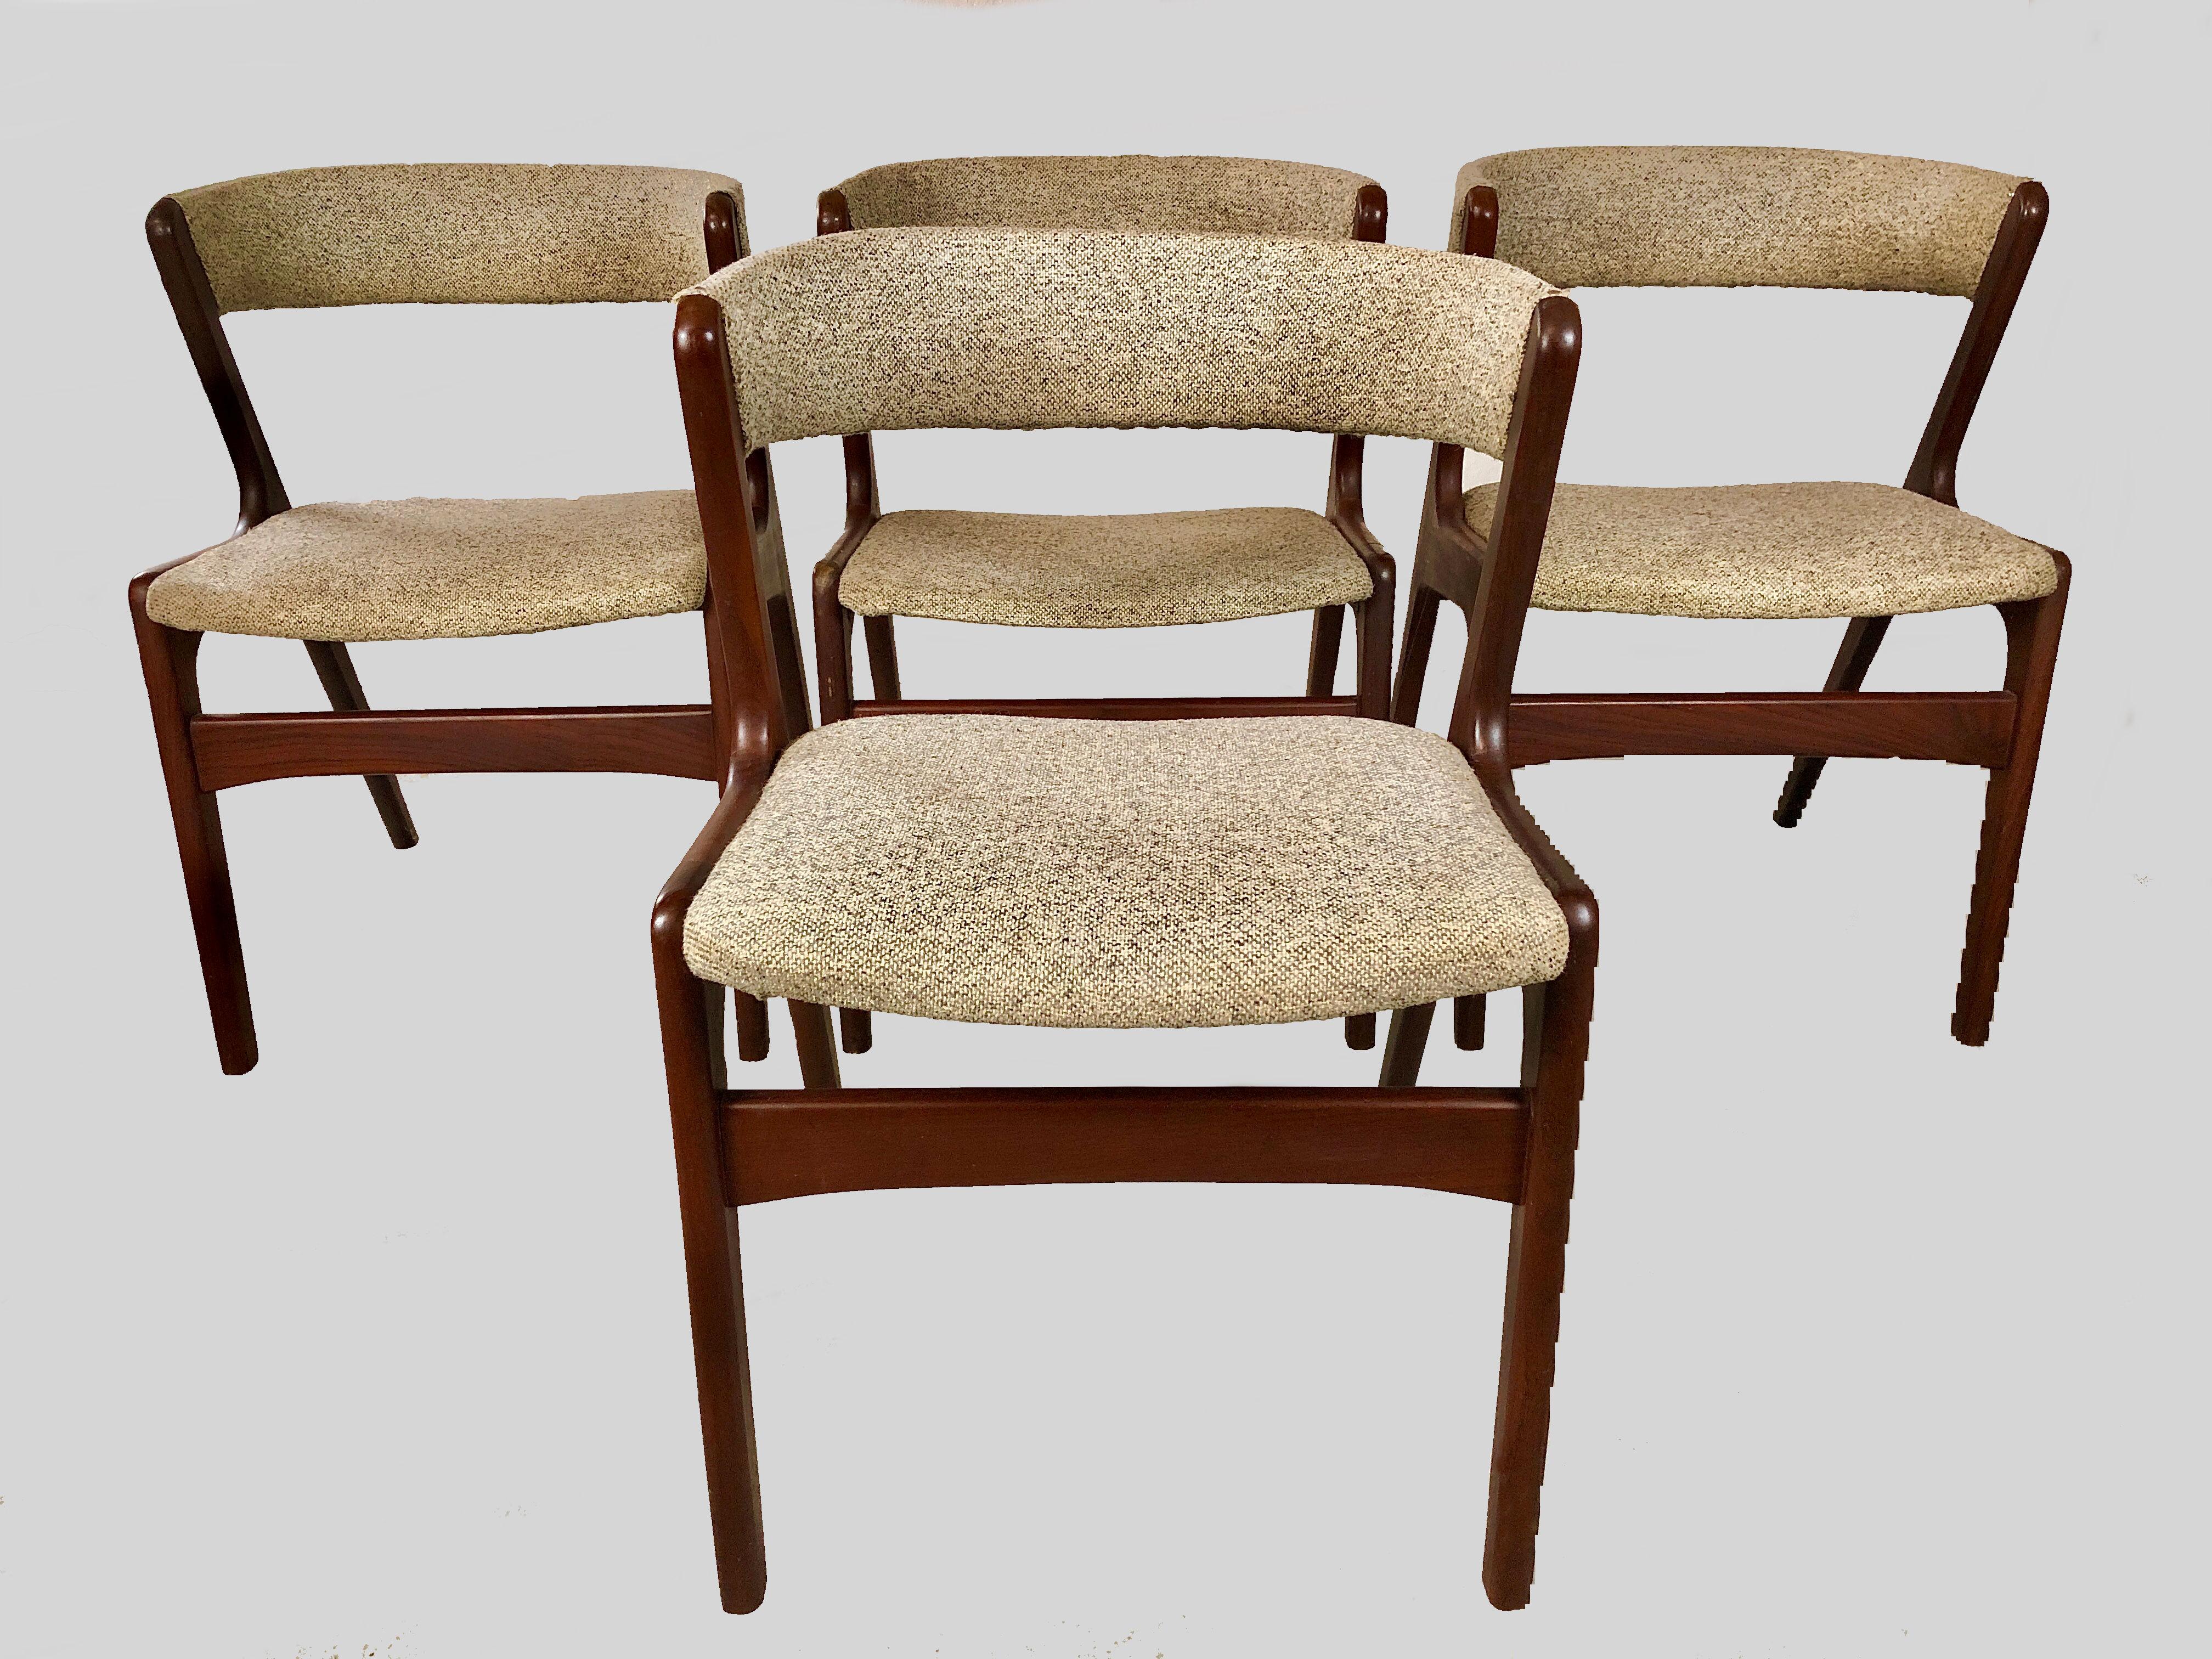 Set of 4 1960s teak dining chairs by Kai Kristiansen

The chairs have Kai Kristiansens typical straight lines and crooked angles that gives the chairs life and personality.

The chairs have been fully restored and refinished by our cabinetmaker to